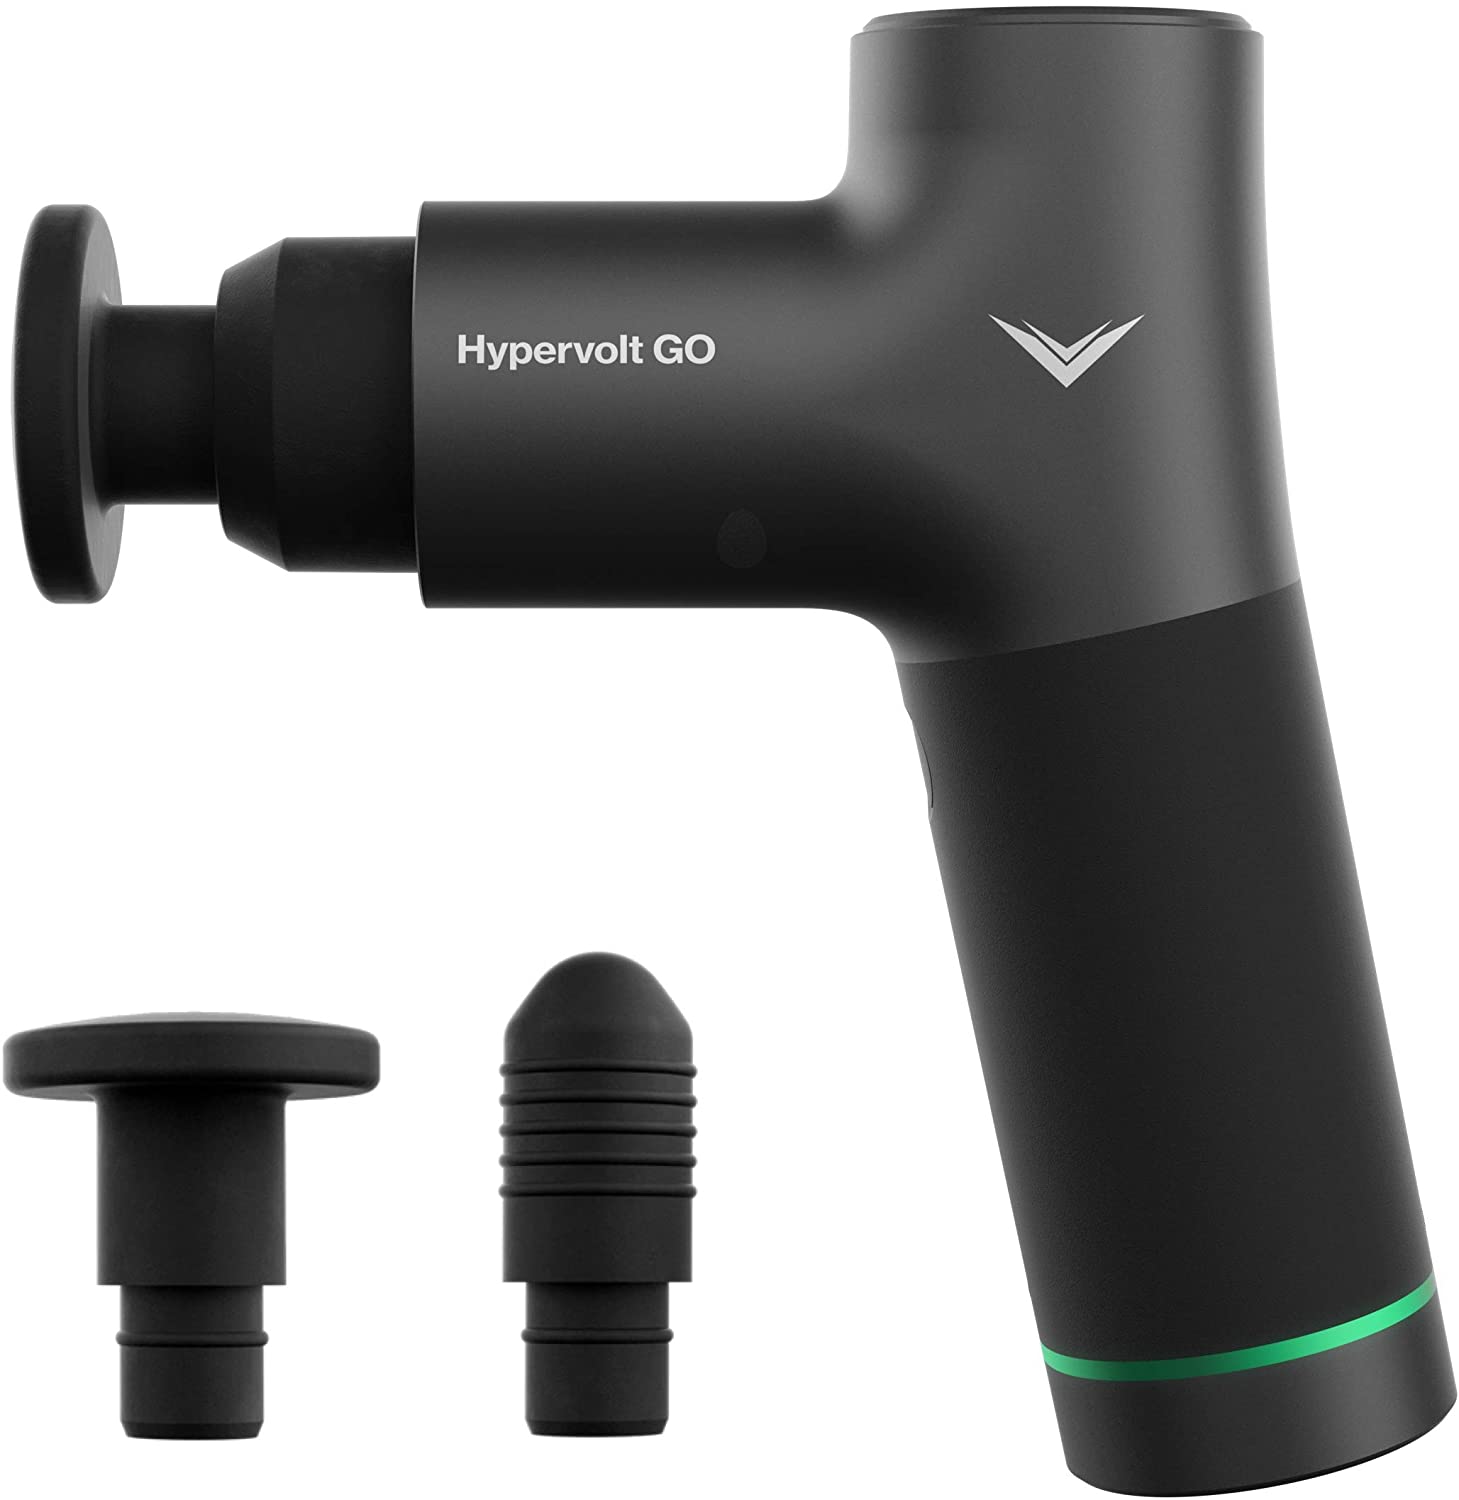 Hyperice Hypervolt GO - Deep Tissue Percussion Massage Gun - Take Pain Relief and Sore Muscle Recovery